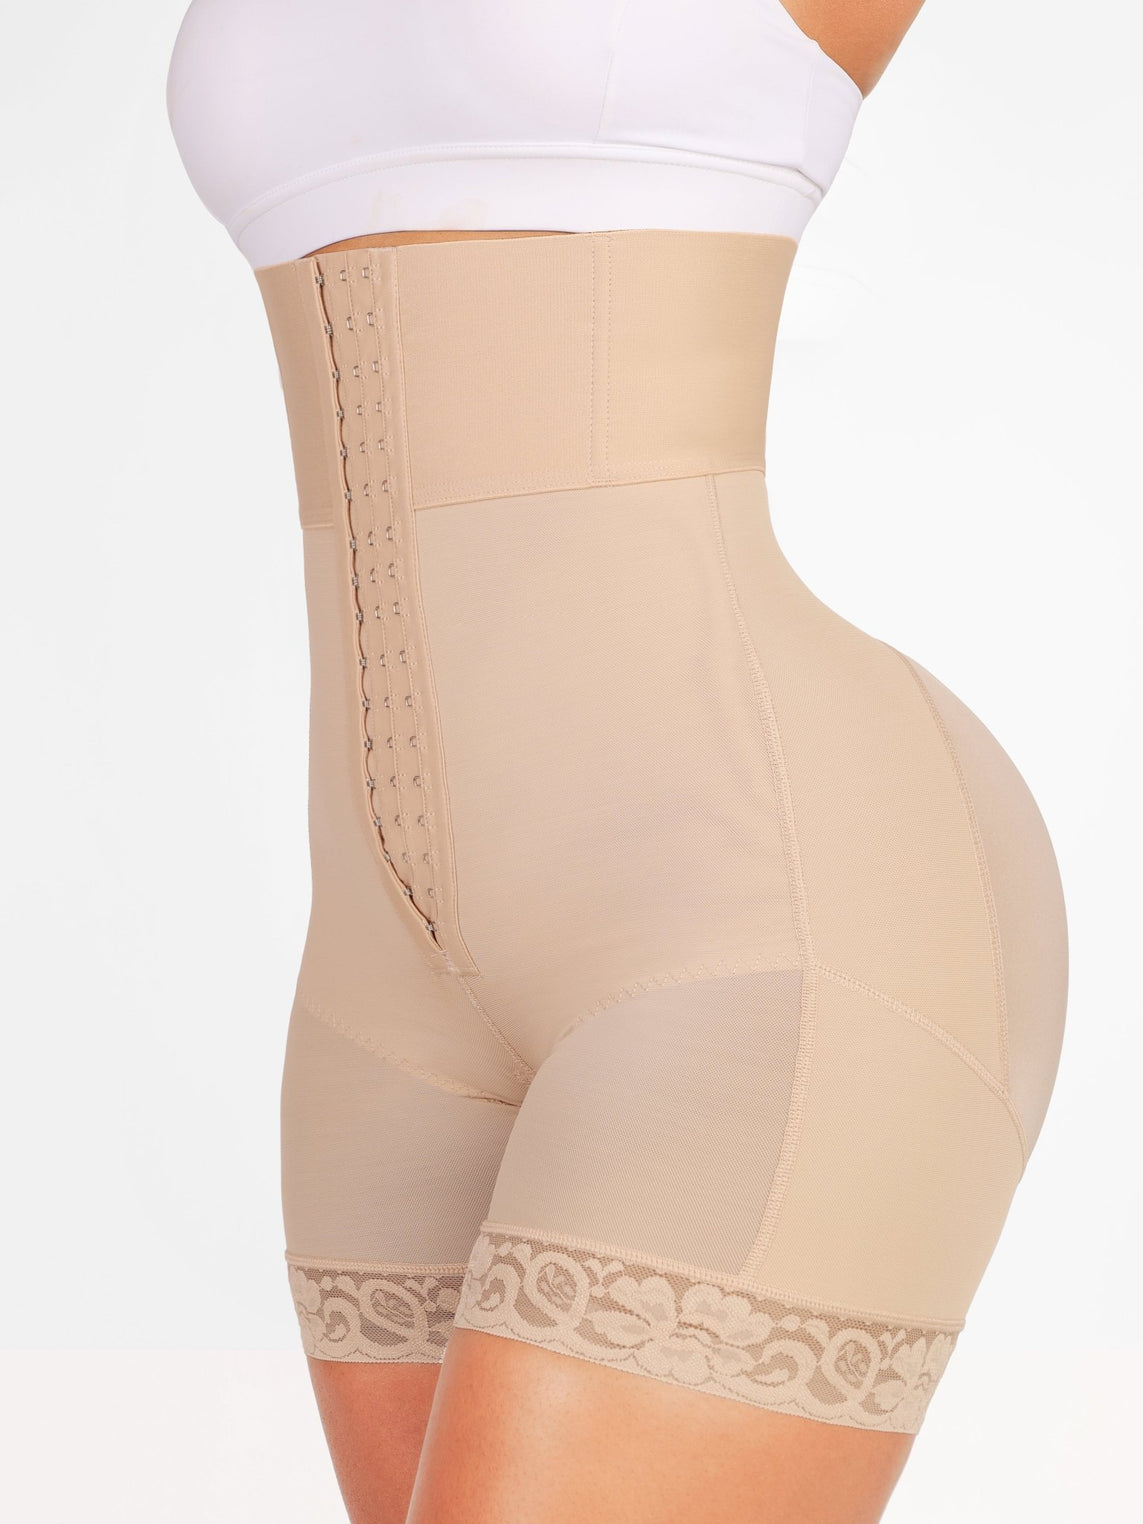 Buy KPS Instant Slimming Effect Dual-Compression Waist Shaper,Slim Waist  Shapewear Tummy Tuck Belt Hourglass Waist Slim Strap Modeling Girdle Waist  Trainer for Woman and Girl Multicolor at